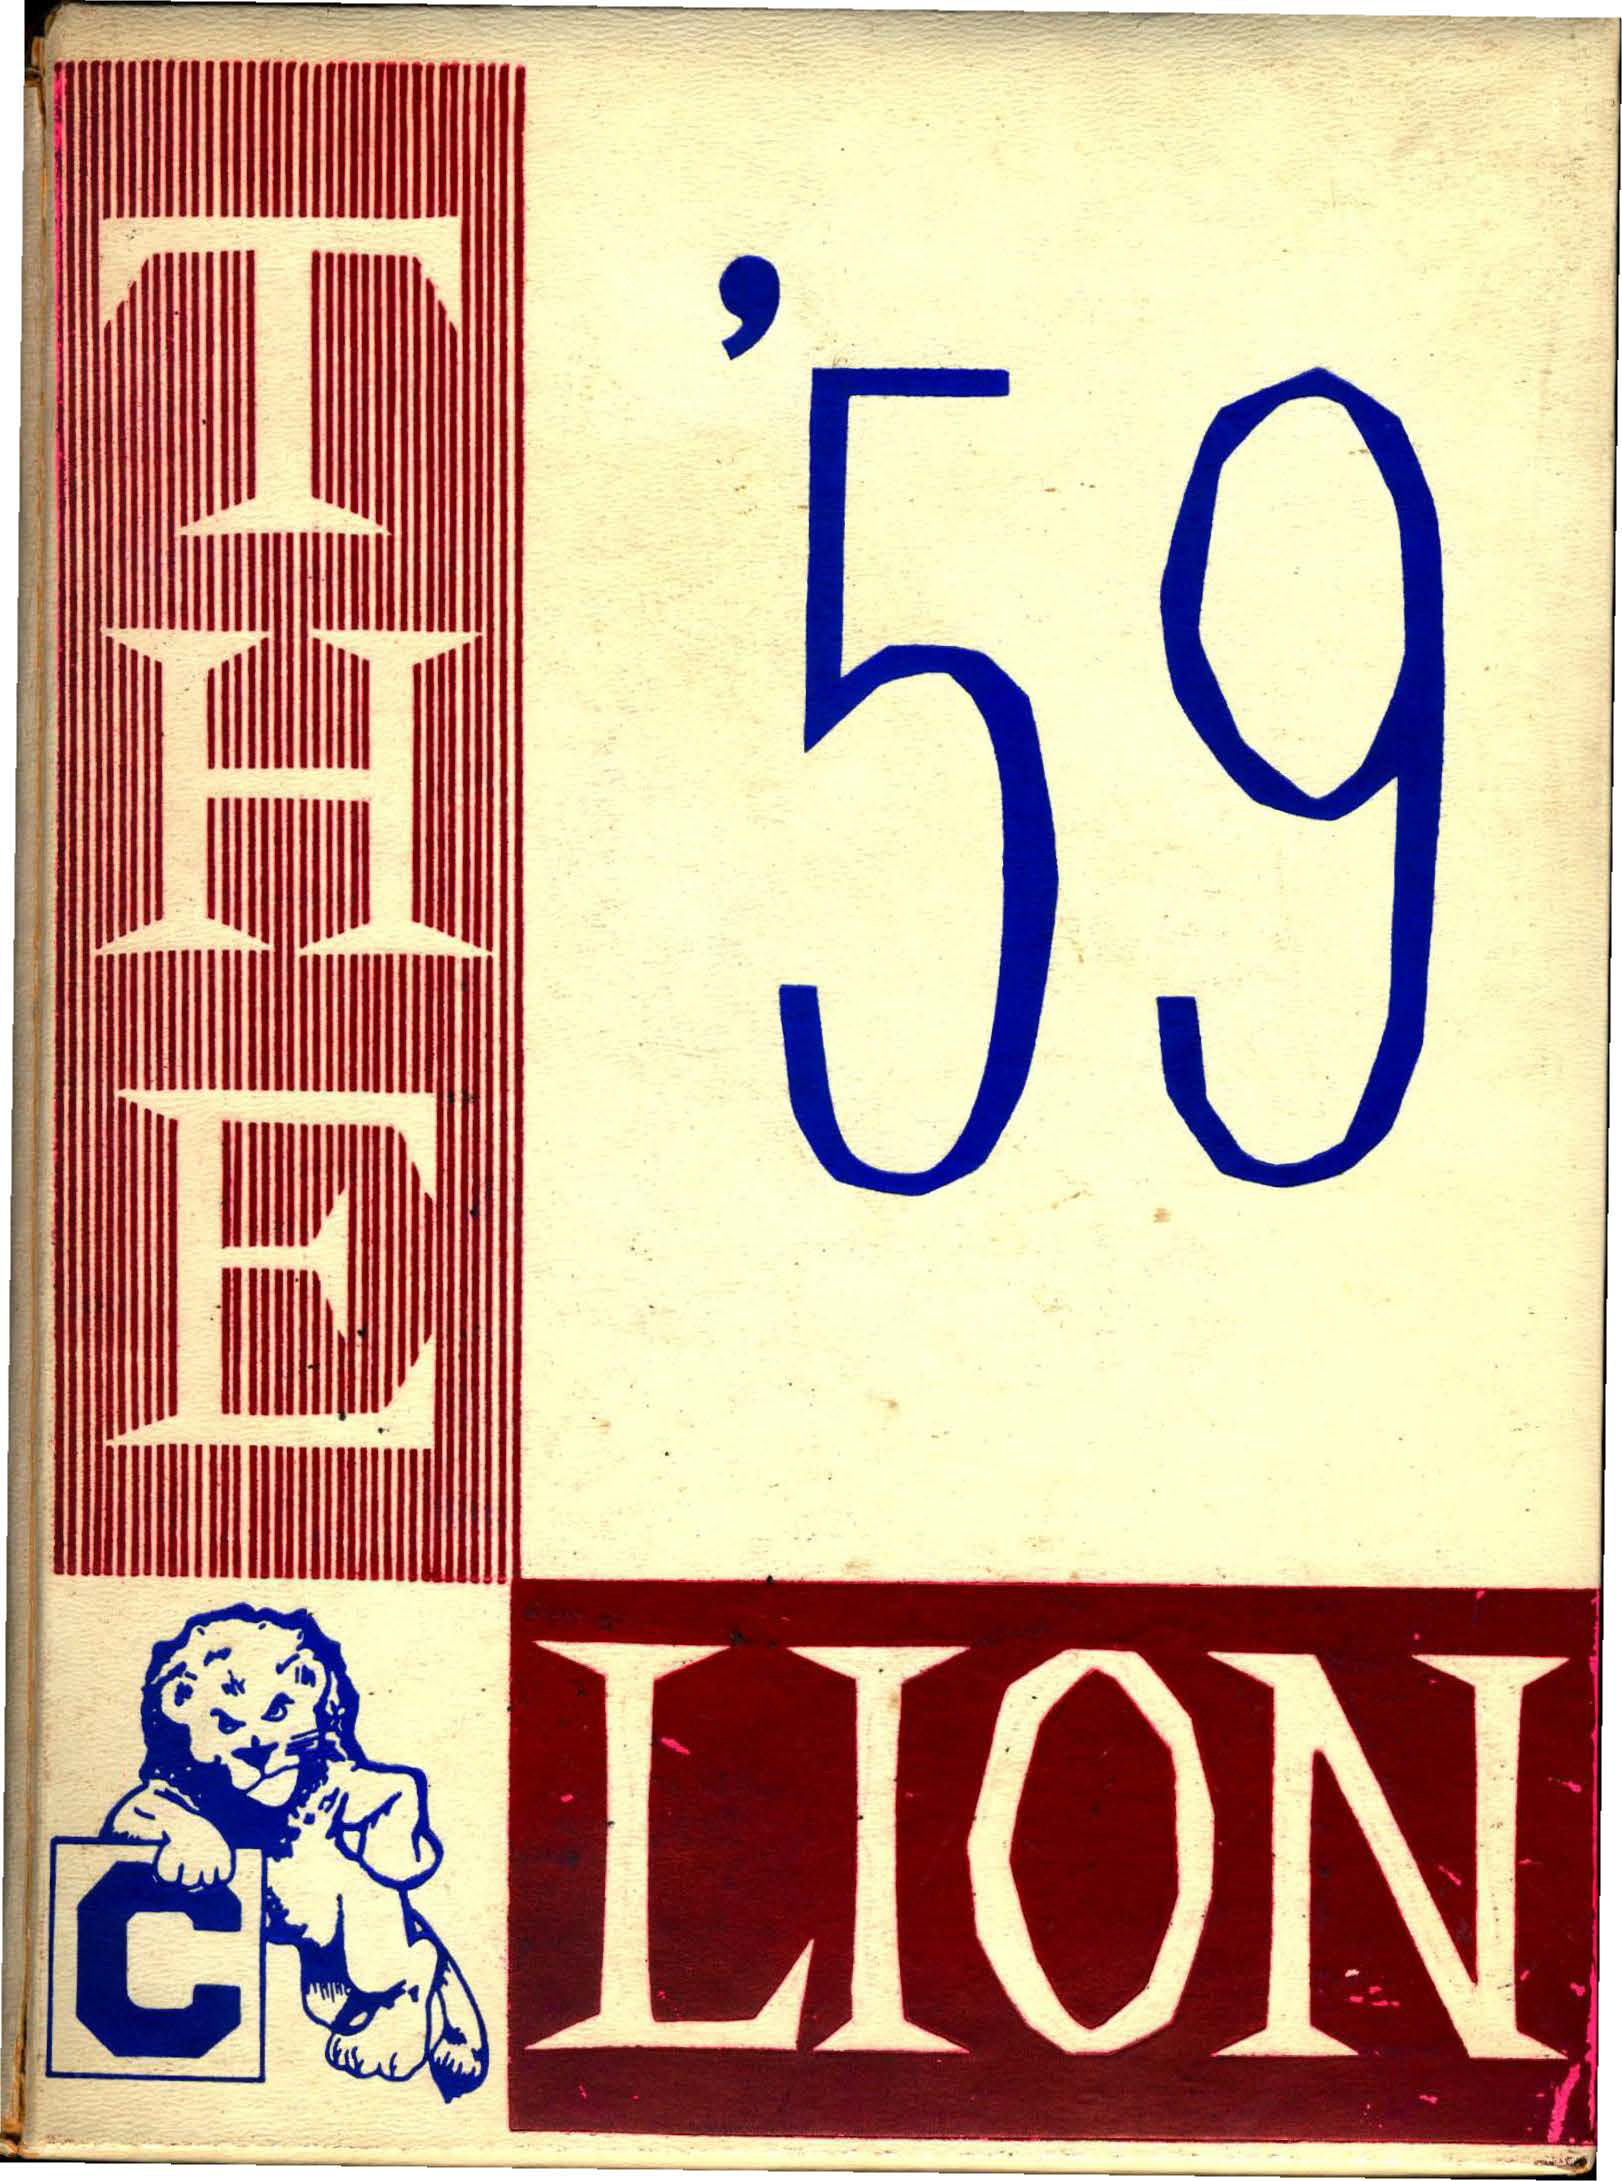 1959 Chelmsford High Yearbook 1